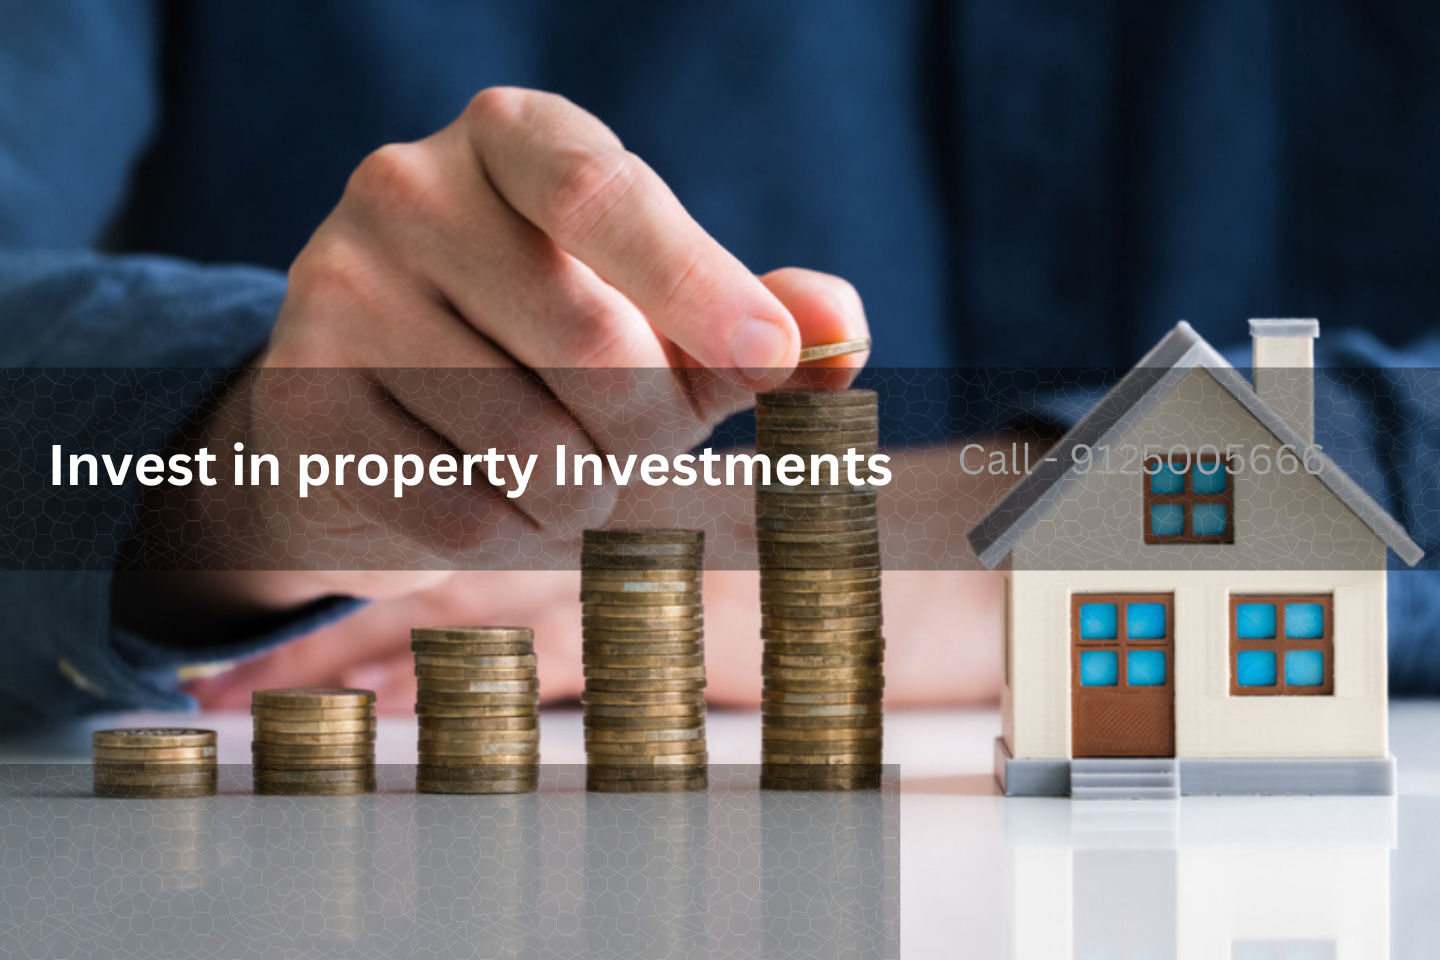 Invest in property investment